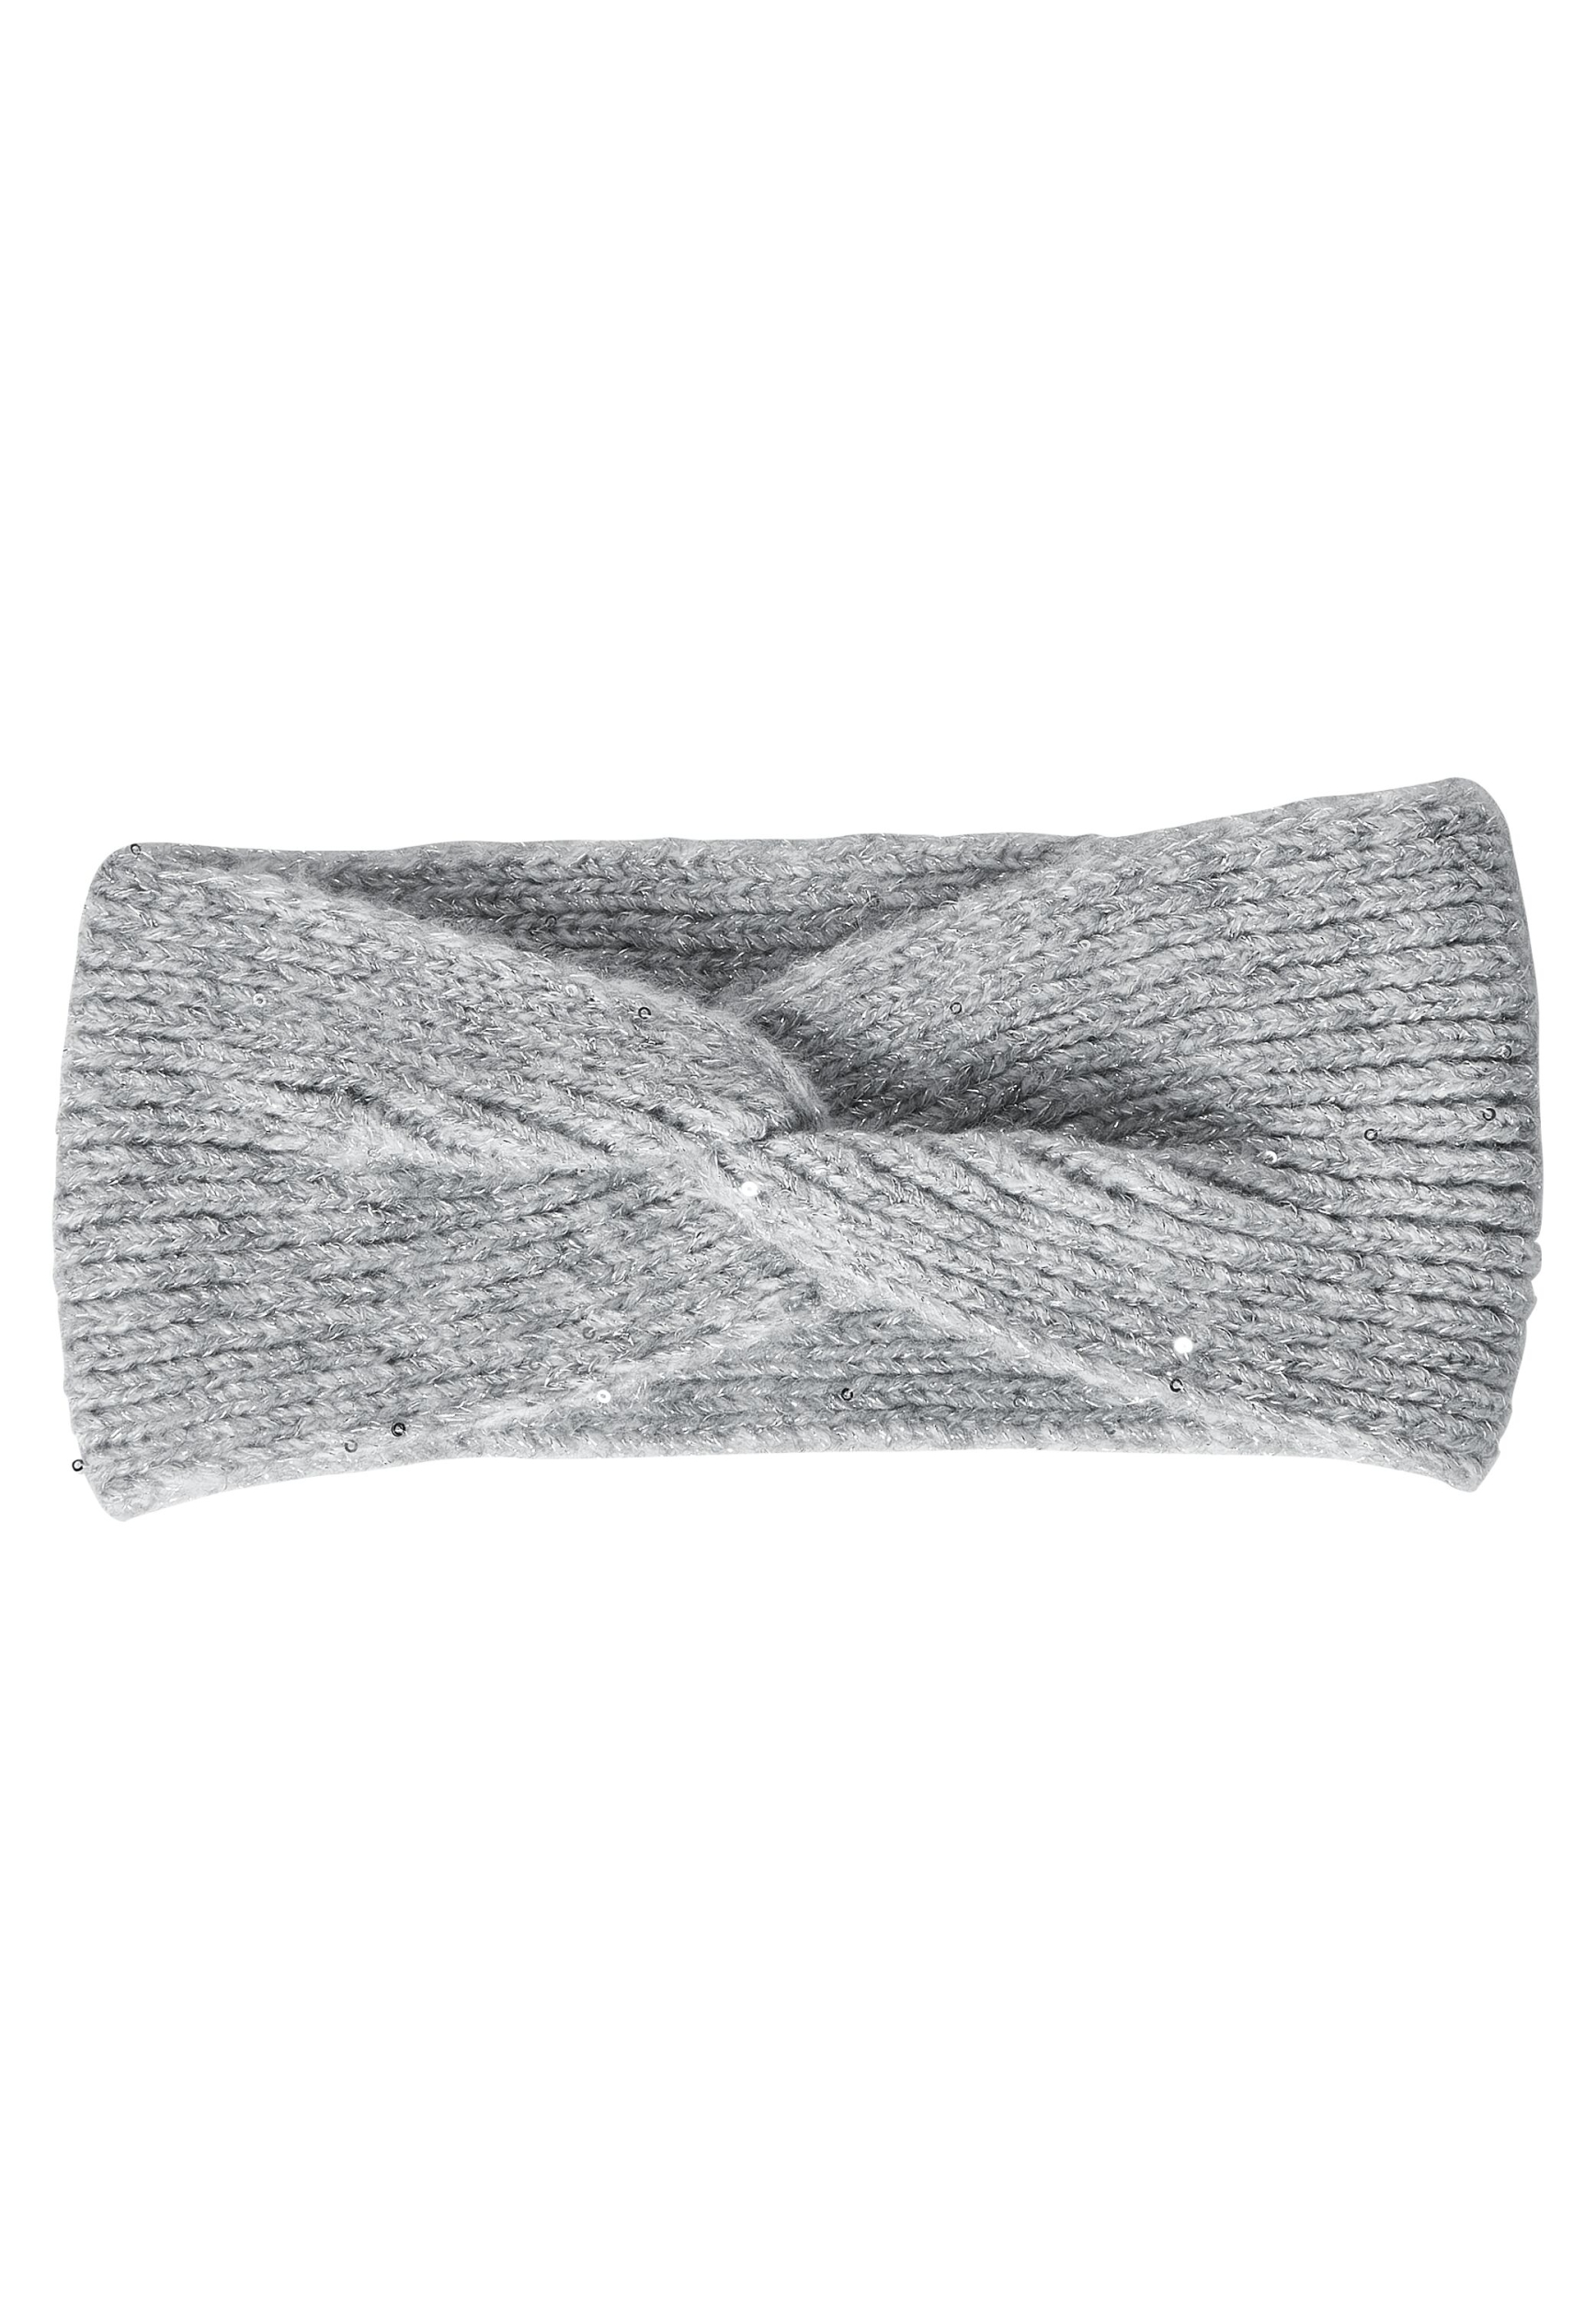 Sequin and Lurex Knit SIZE | mineral Headband | ONE | melange B572287-10327-A grey